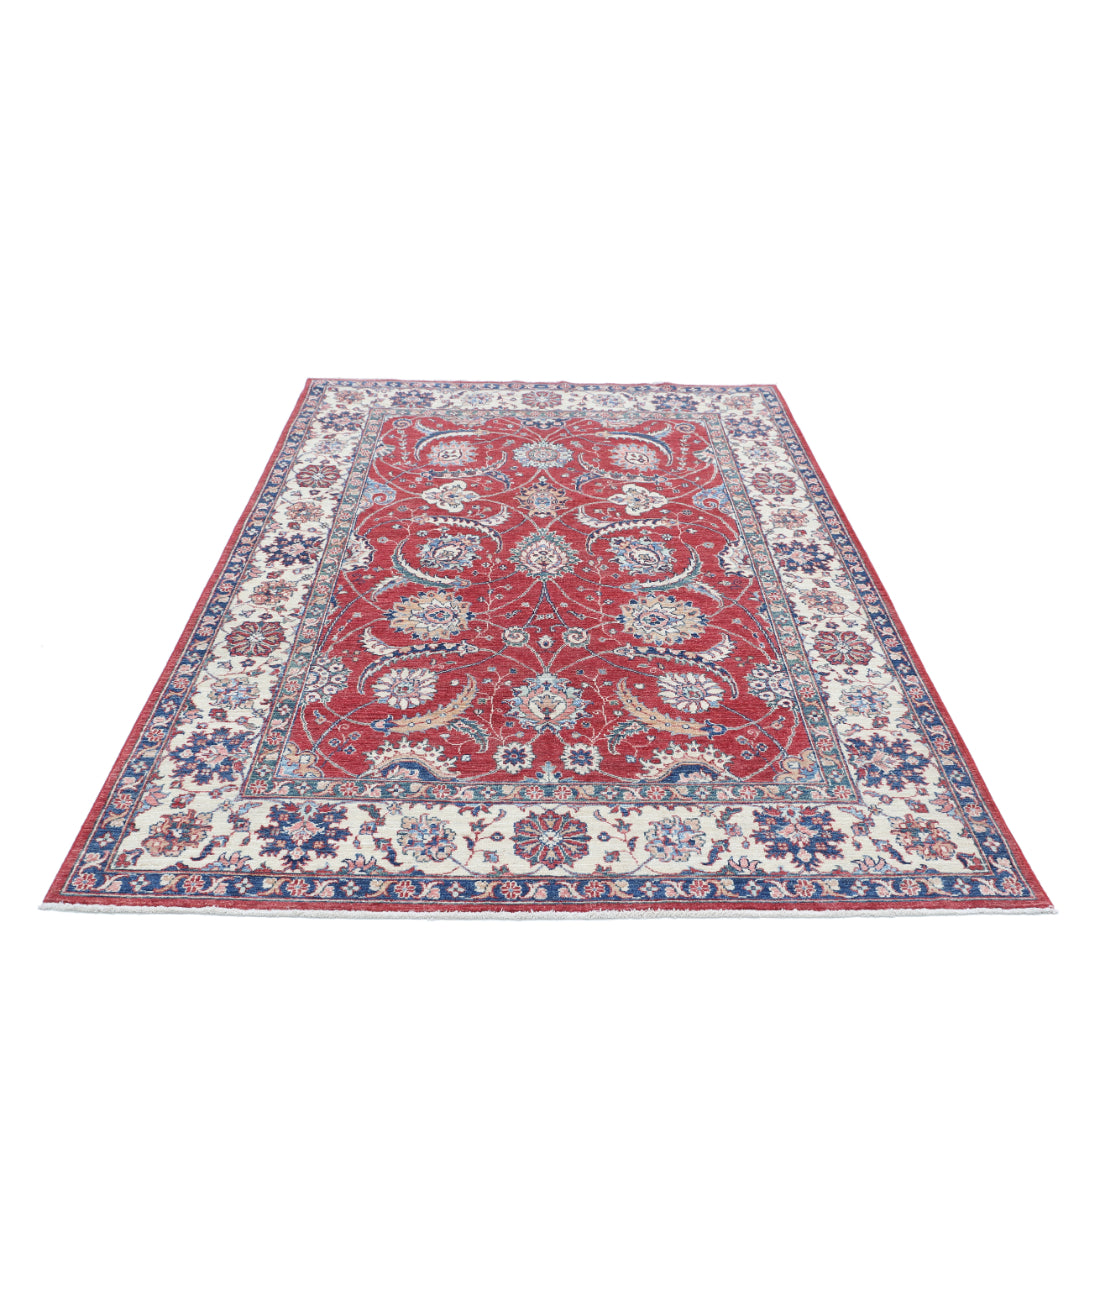 Hand Knotted Ziegler Farhan Wool Rug - 5'4'' x 8'0'' 5'4'' x 8'0'' (160 X 240) / Red / Ivory